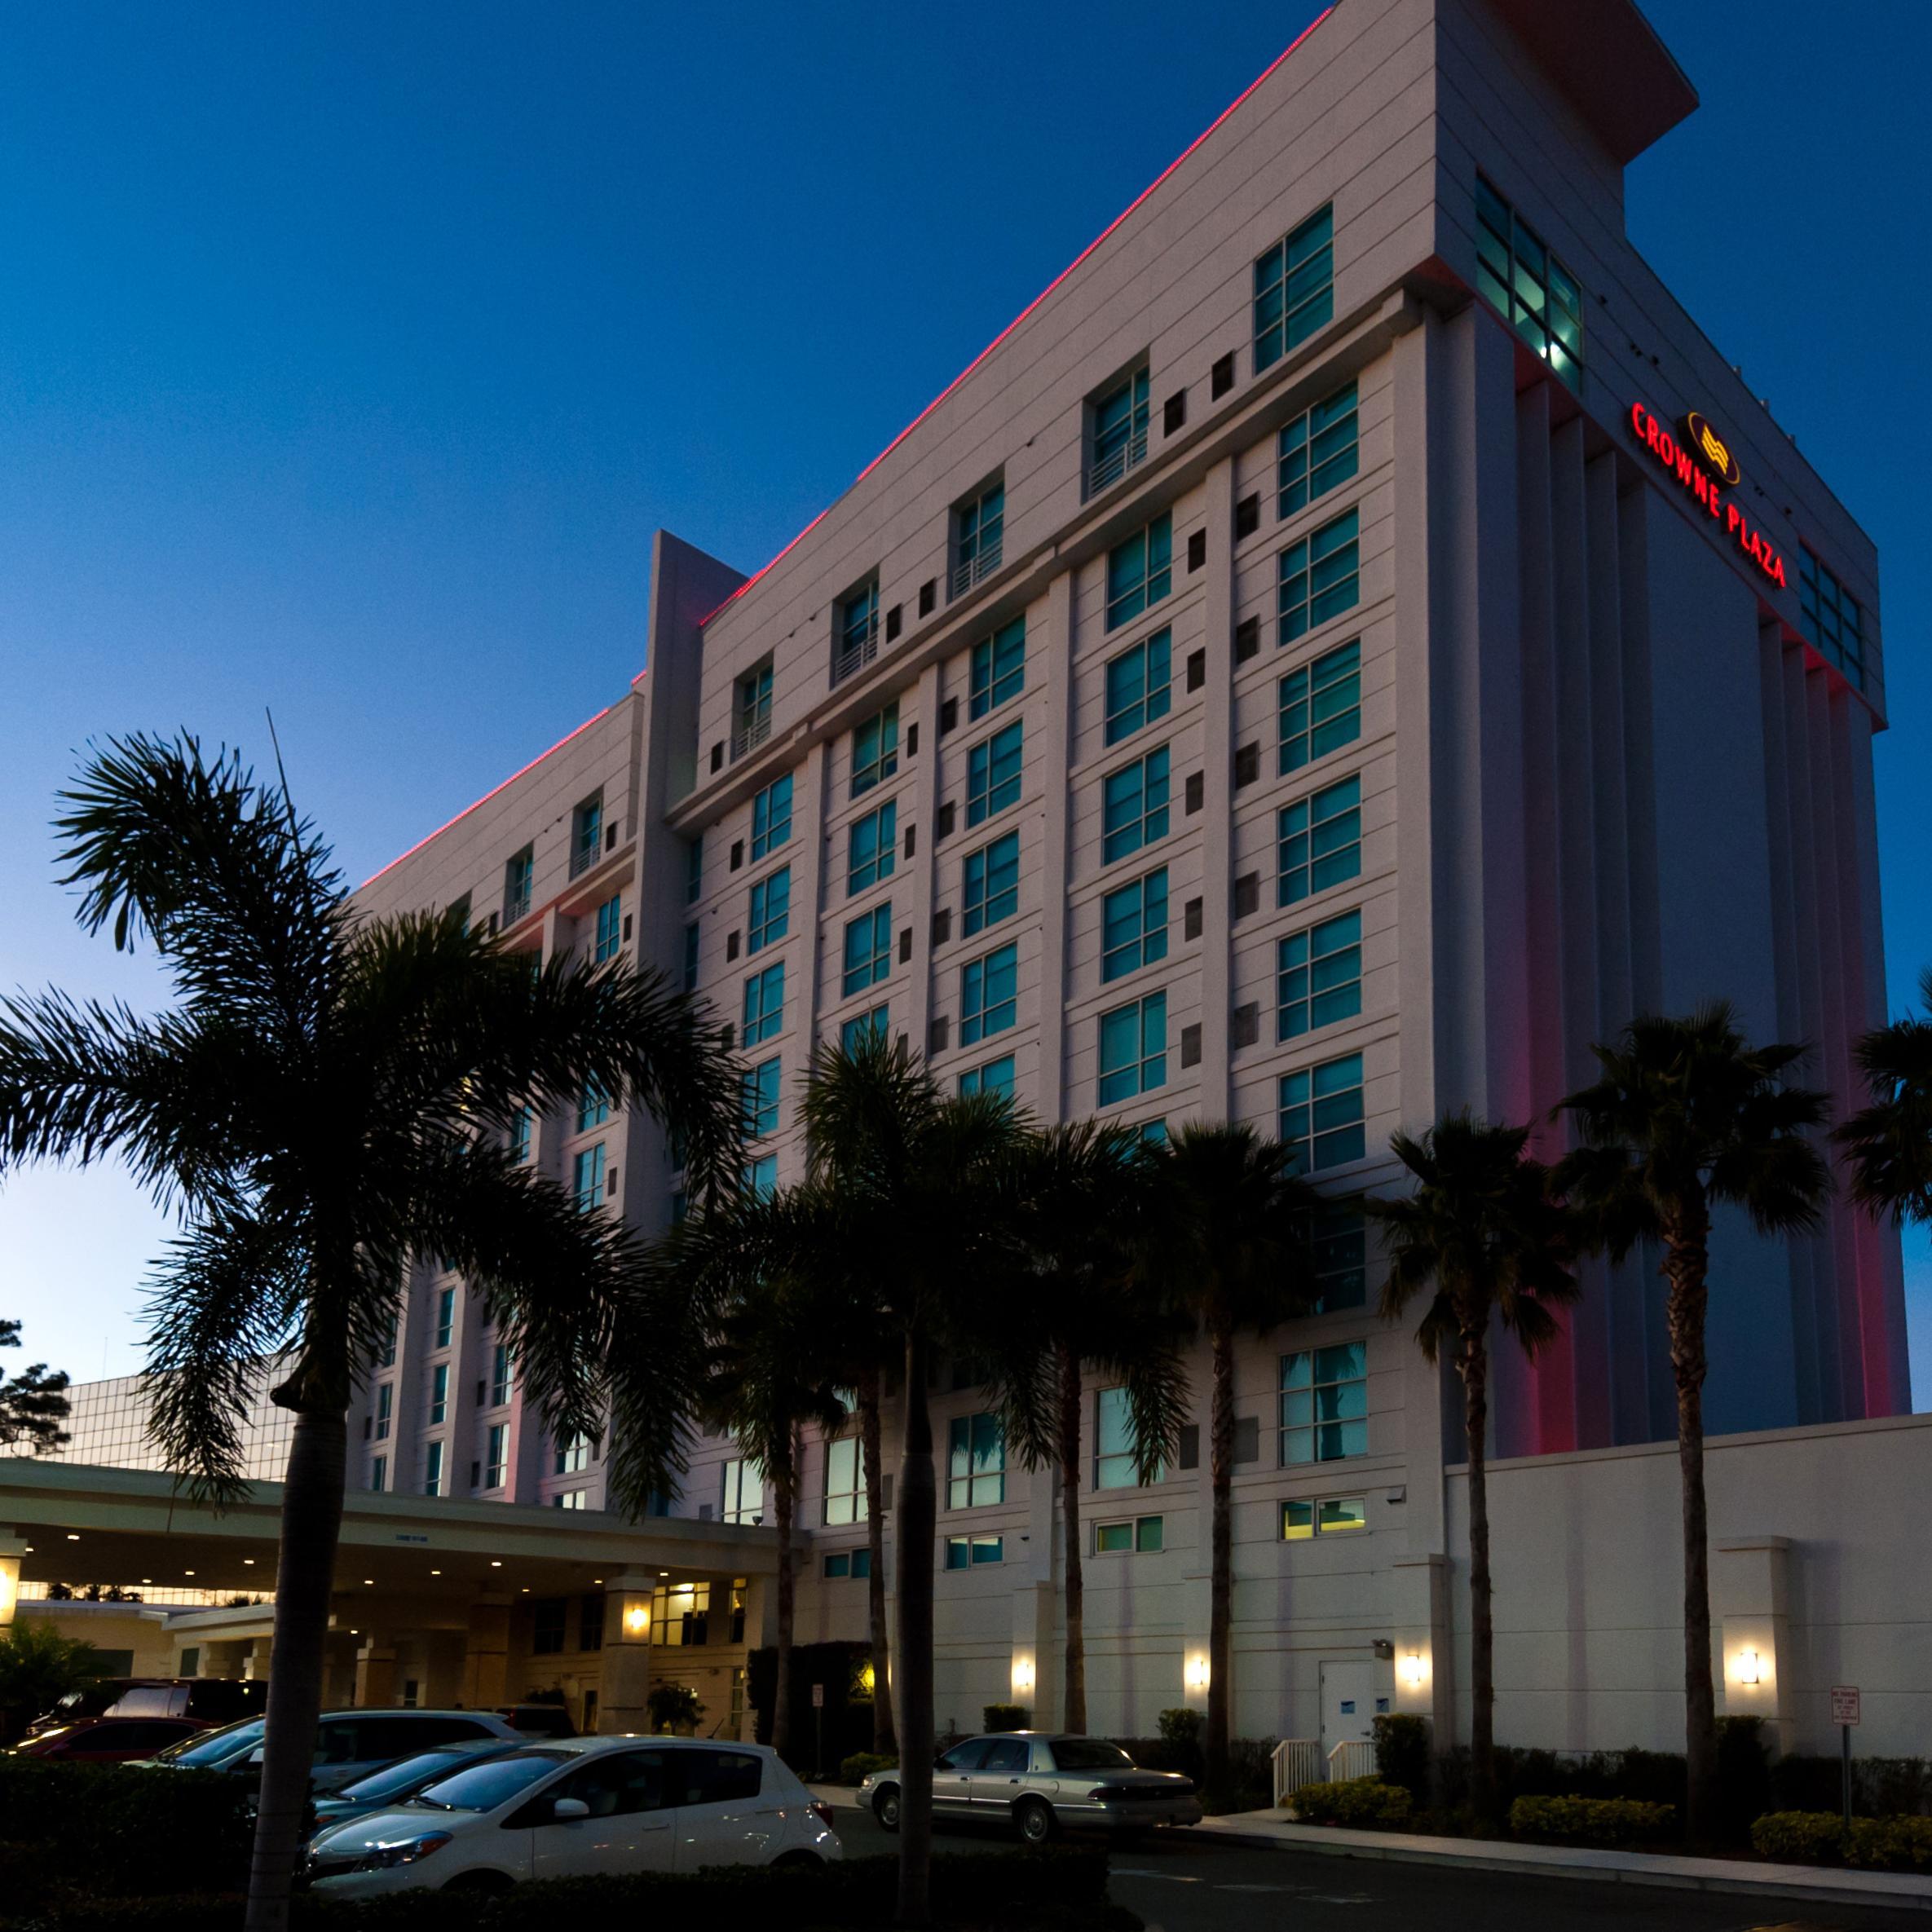 Opened in 2009. 222 room hotel with over 9,000 square feet of total event and meeting space.Complimentary Tampa Airport and local 3 mile radius transportation.